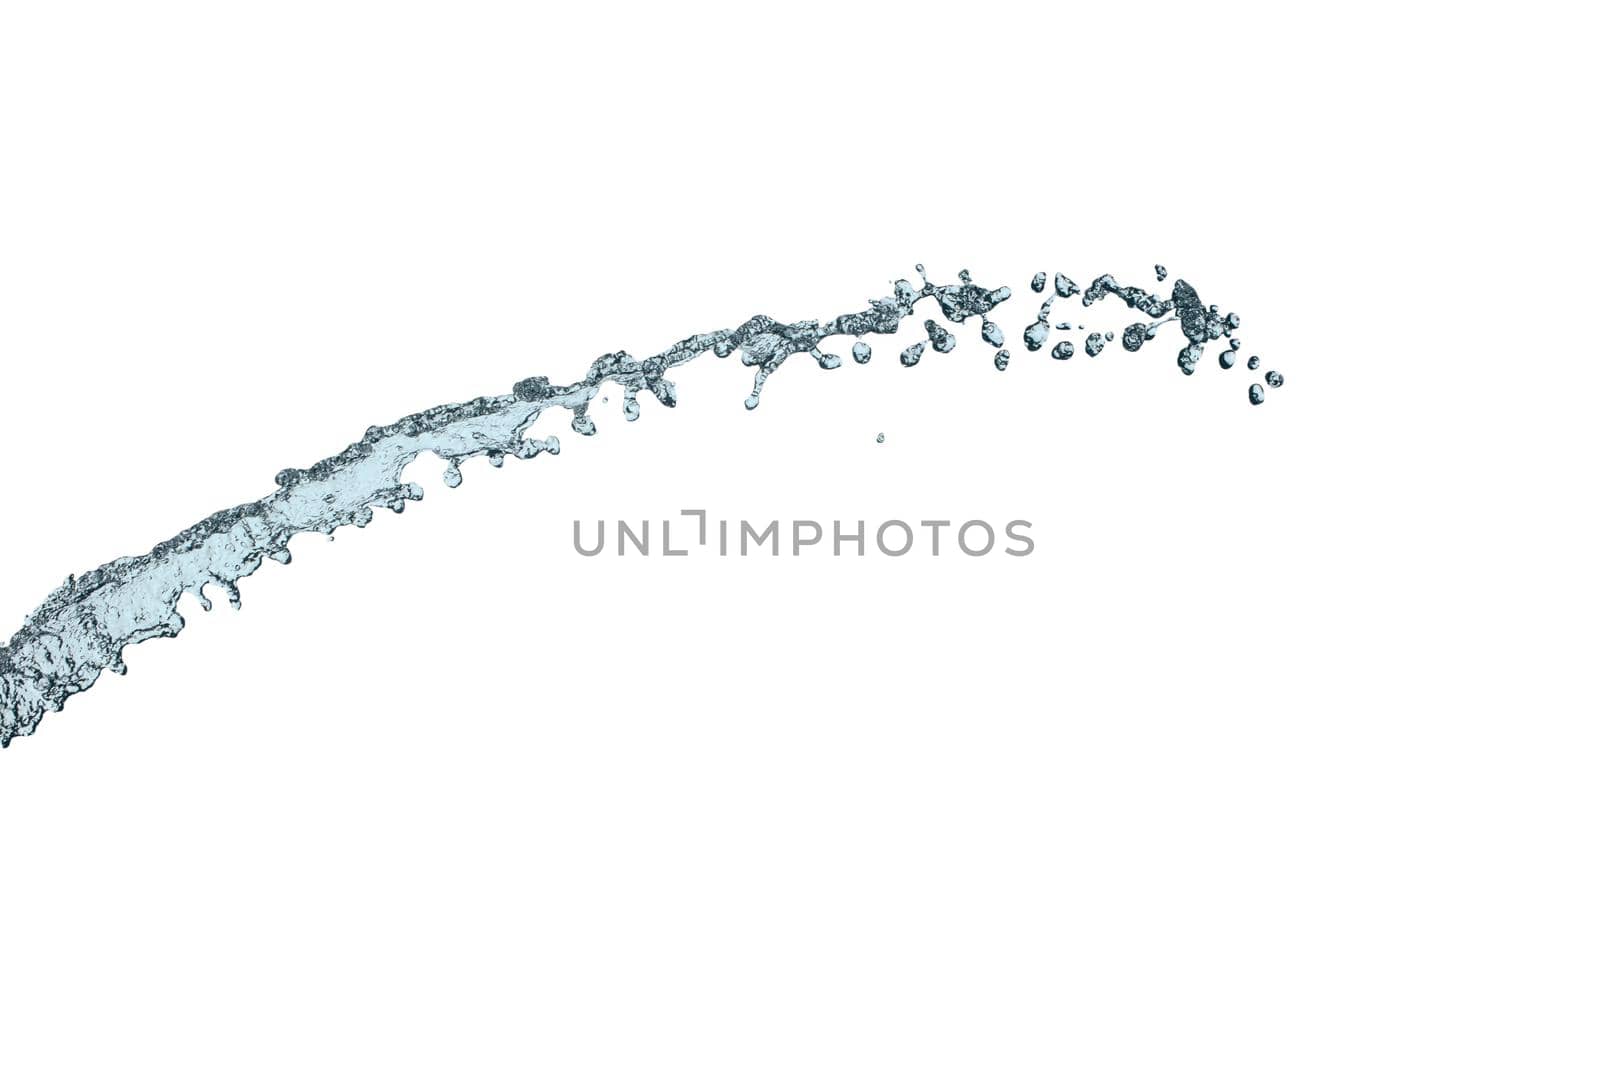 Water splash isolated on white with clipping path